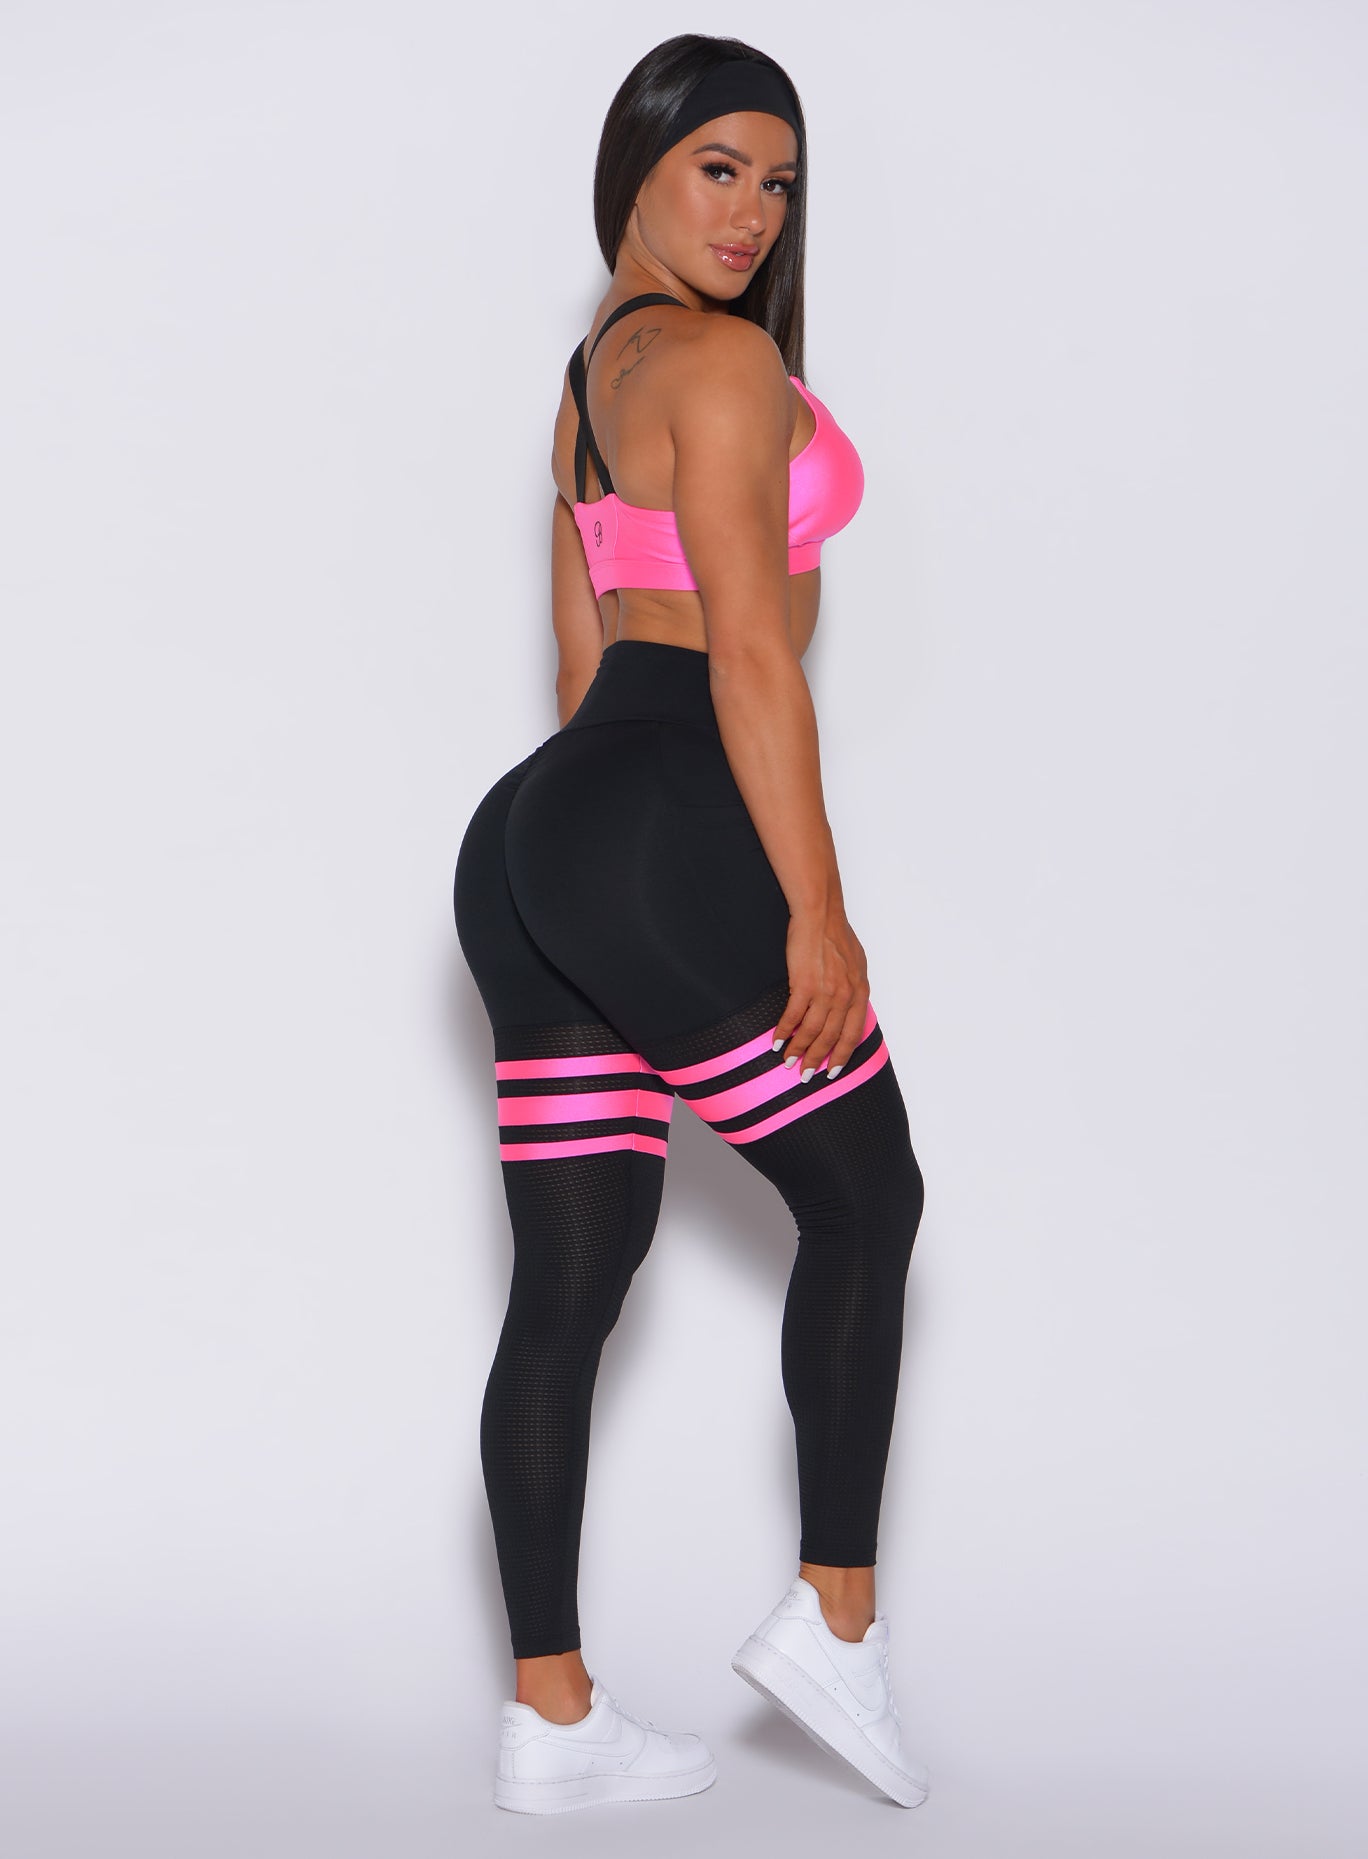 Right side profile view of a model facing to her right wearing our scrunch thigh high in black with neon pink stripes on the thighs and a matching glow sports bra